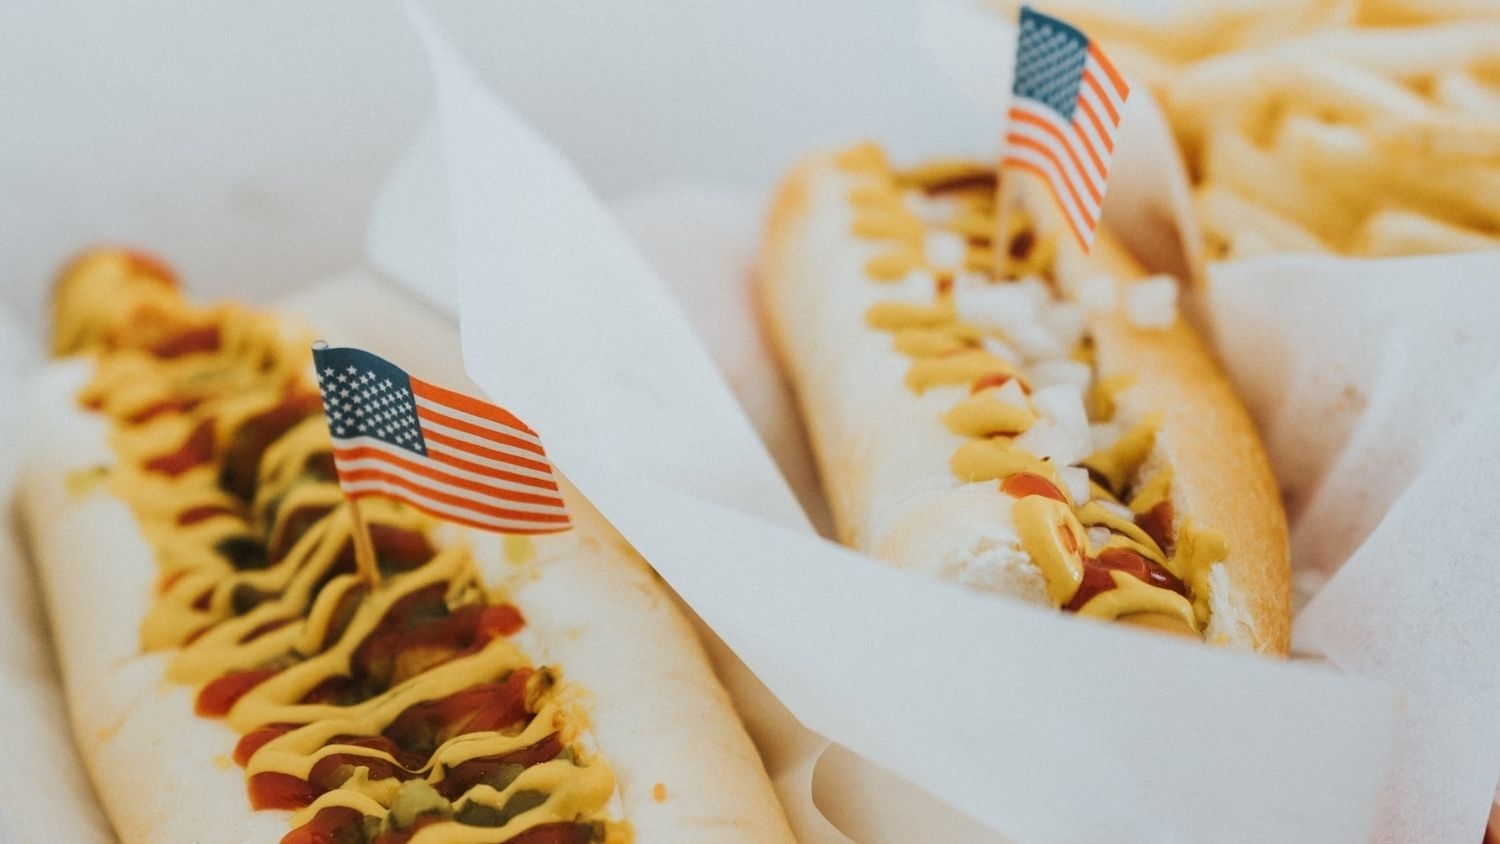 Hot dogs with American flag decorations.